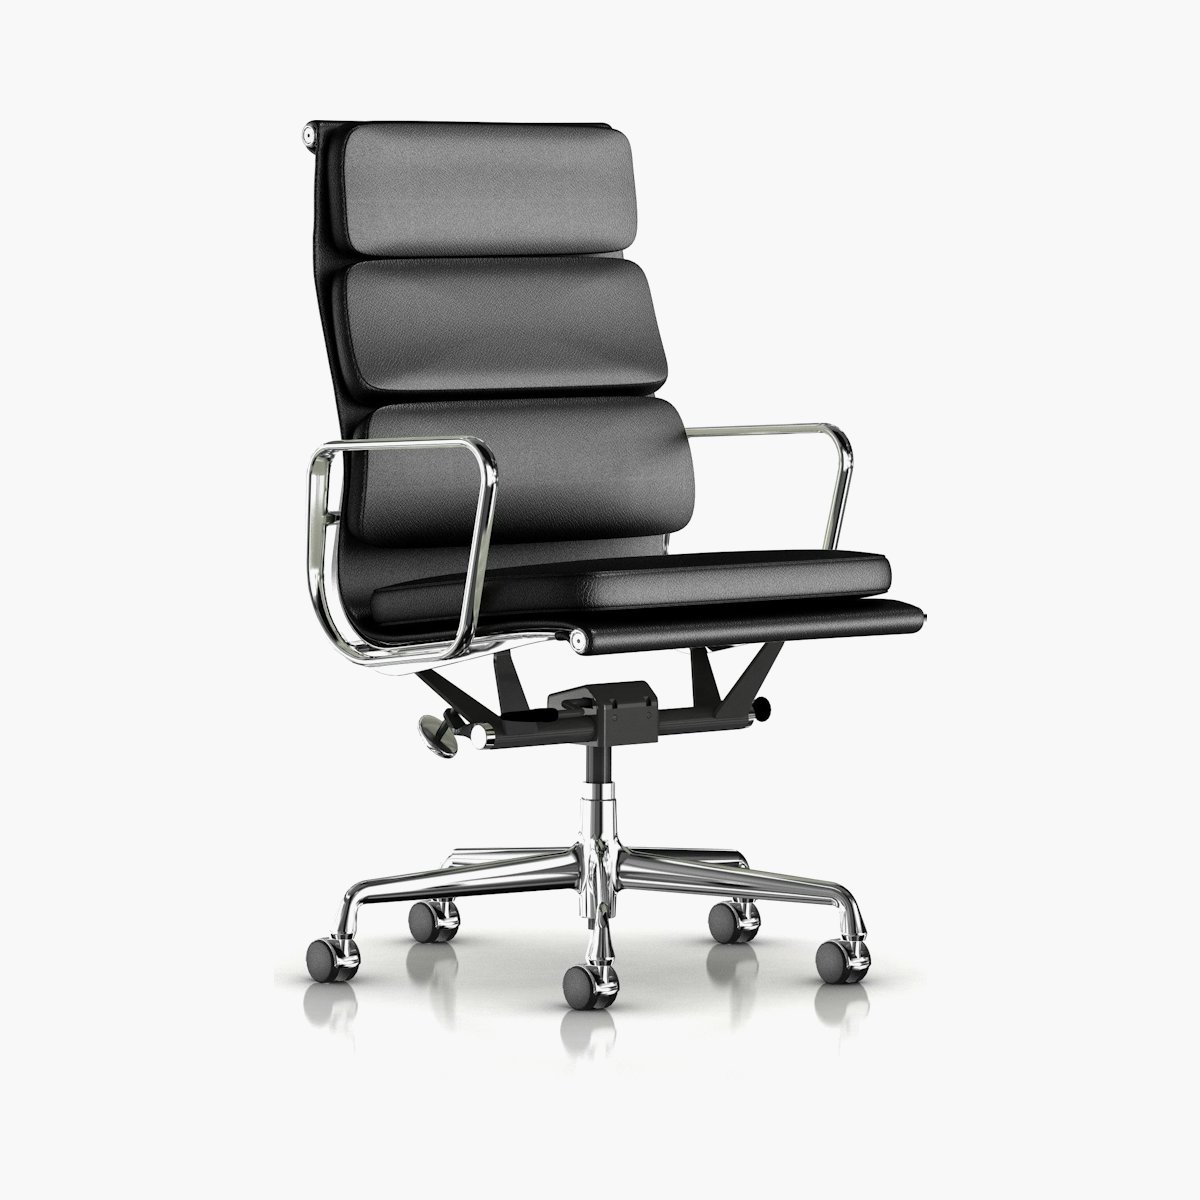 Eames Soft Pad Chair, Executive Height